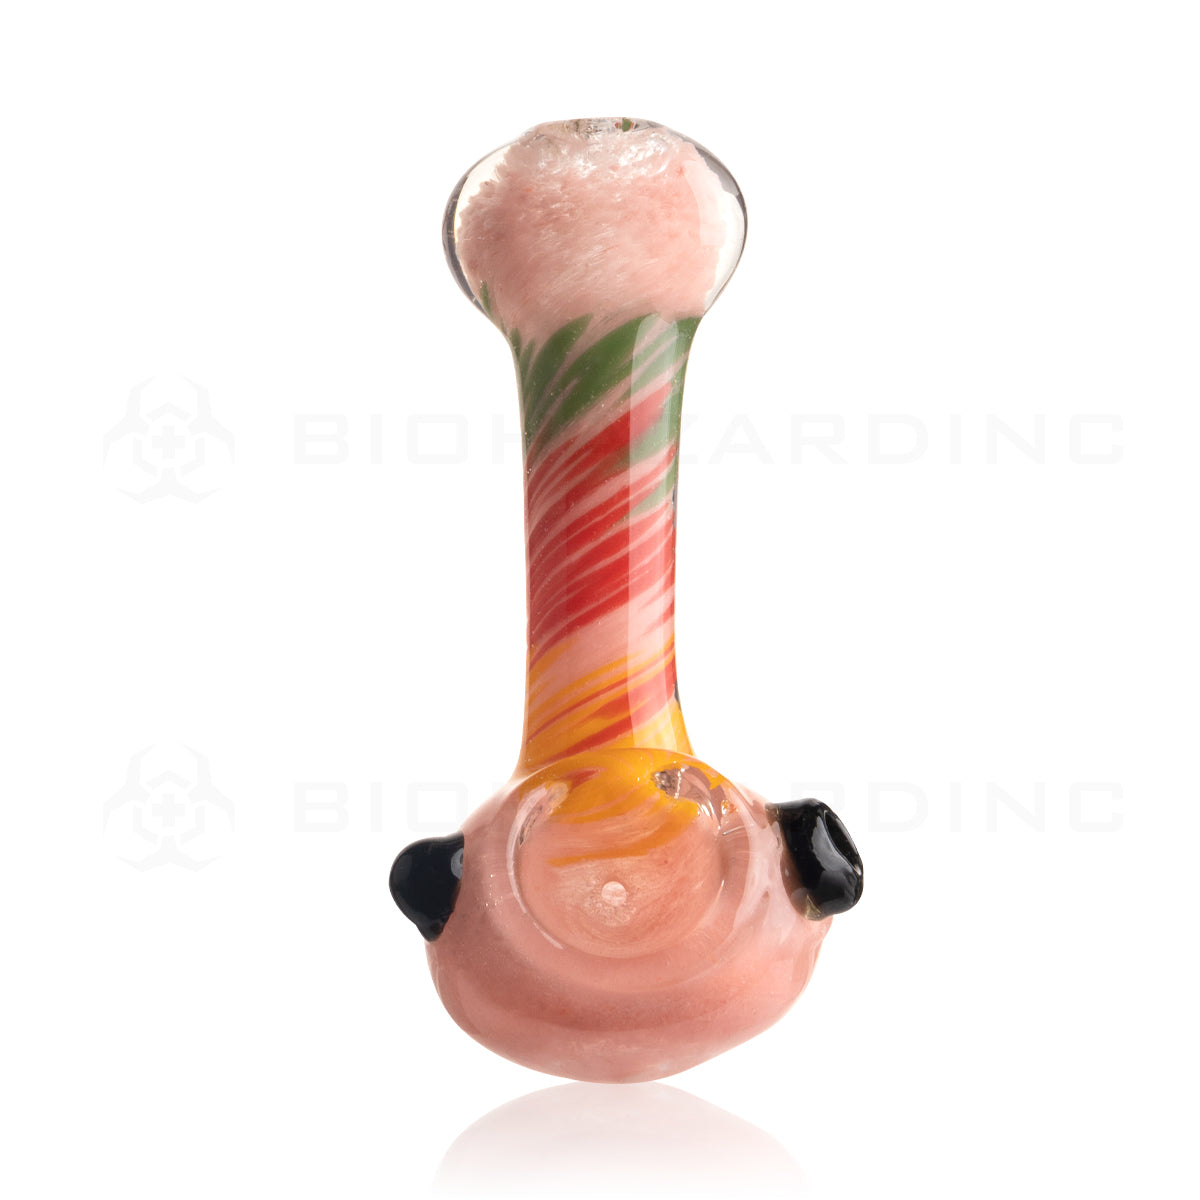 Hand Pipe | Classic Glass Spoon Fritted Hand Pipe w/ Rasta Stripe | 4" - Glass - Assorted Colors Glass Hand Pipe Biohazard Inc   